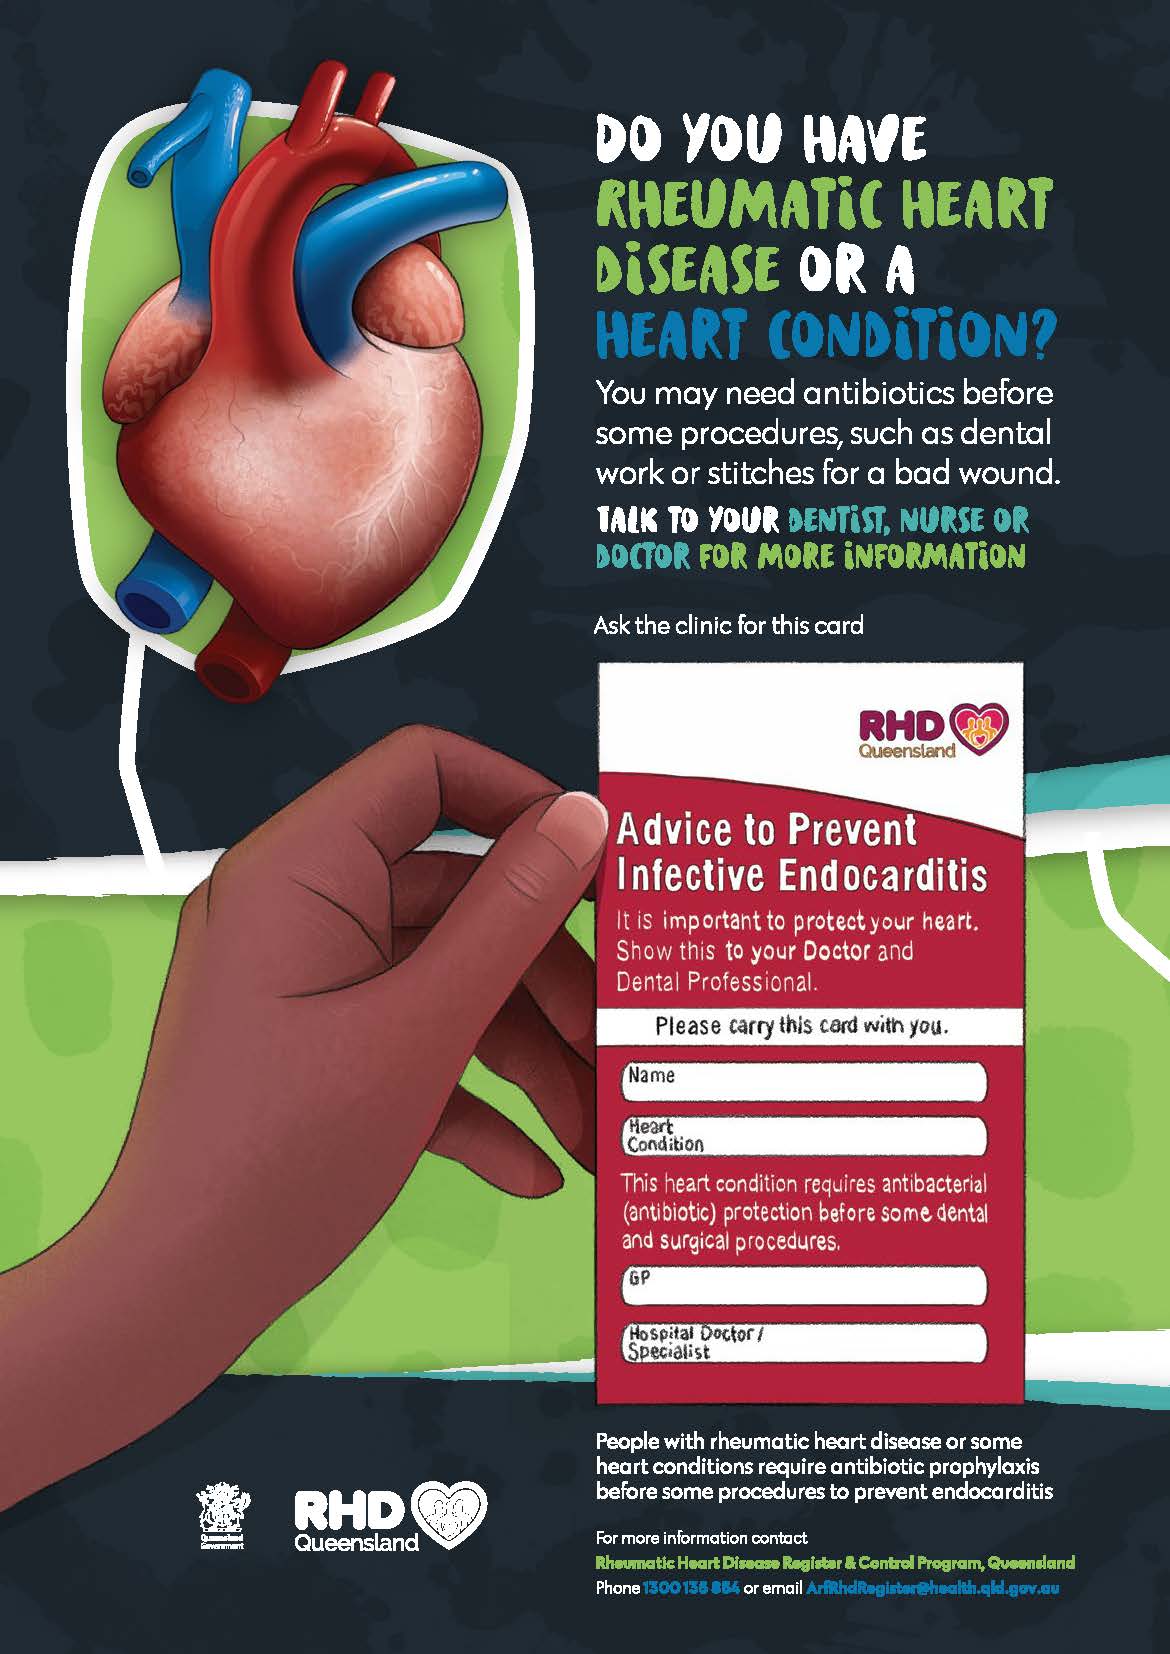 Do you have rheumatic heart disease or a heart condition? You may need antibiotics before some procedures, such as dental work or stitches for a bad wound. 